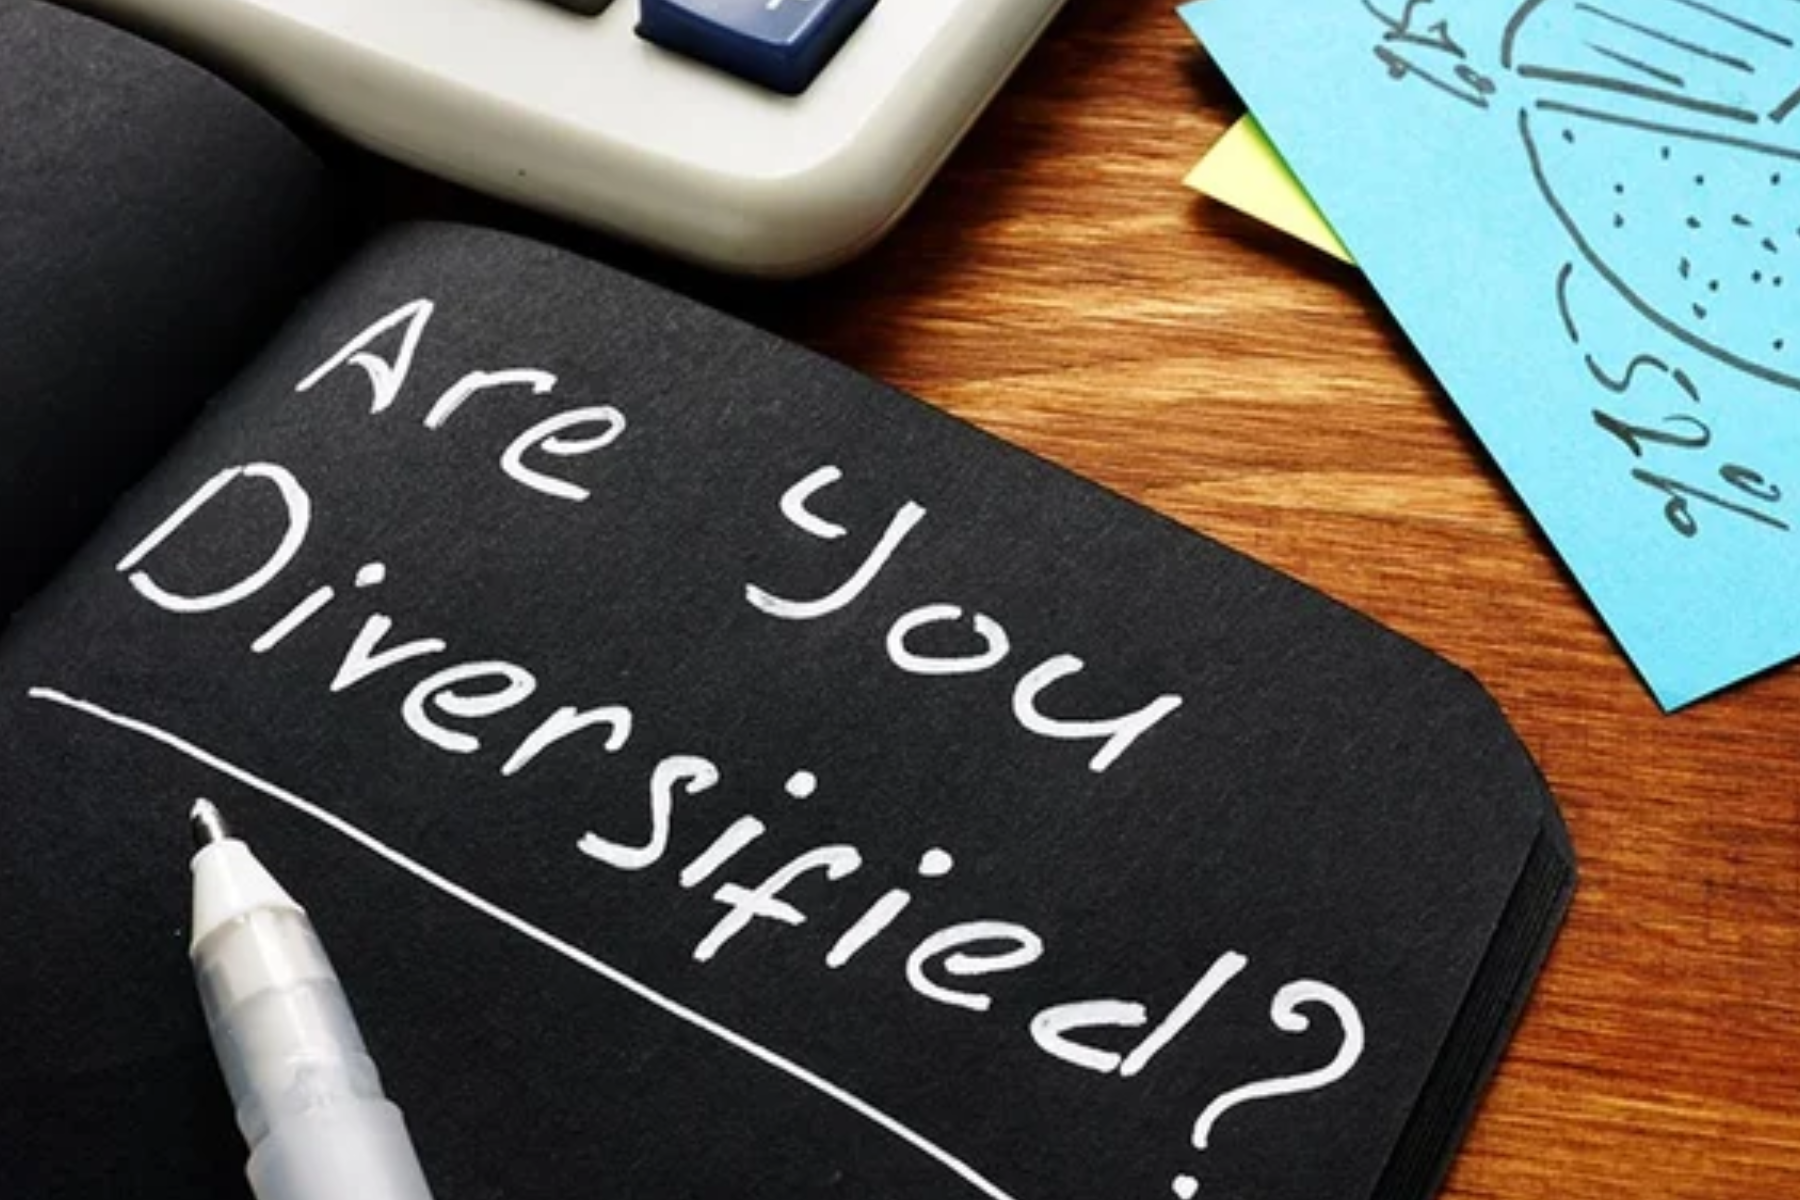 A black notebook with the words "Are You Diversified?" written on the cover